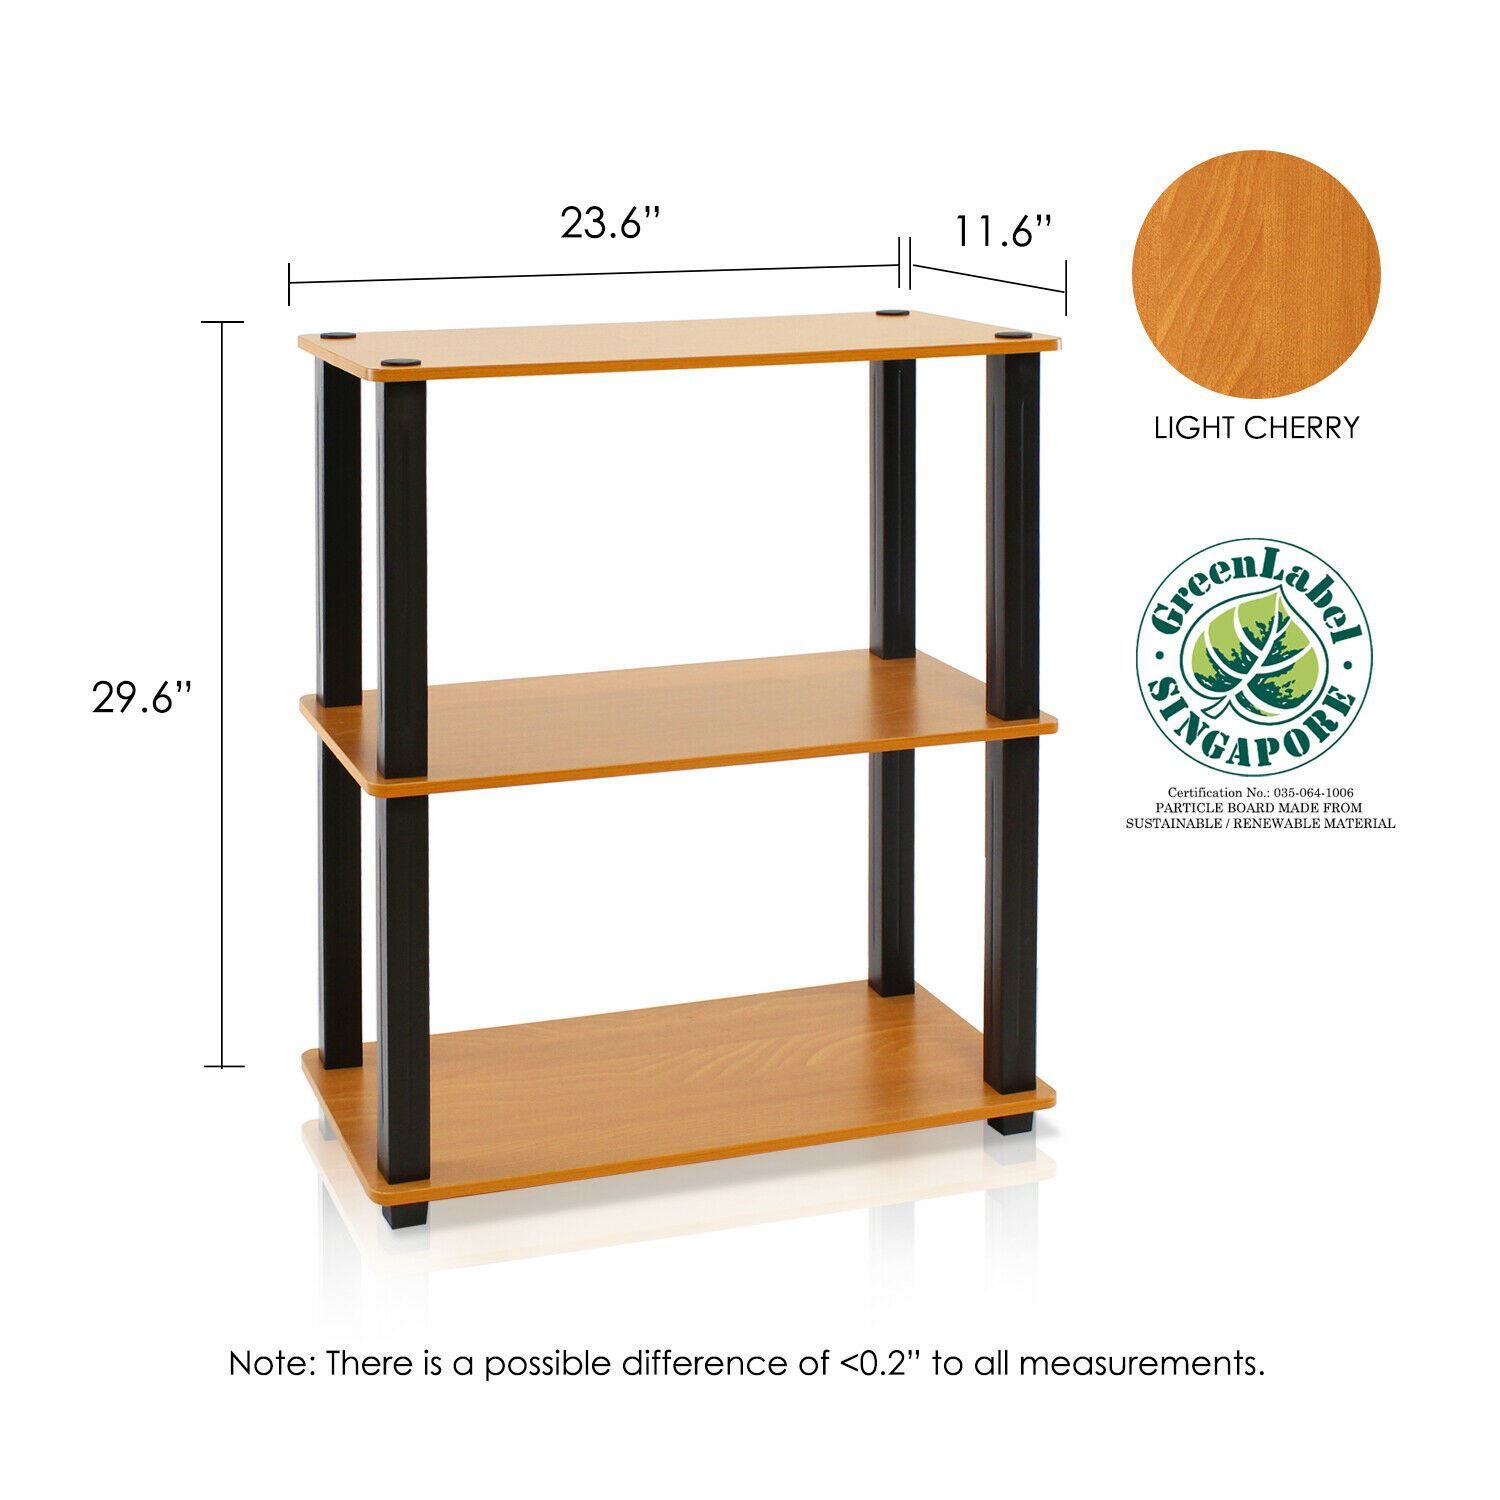 - Furinno Turn-N-Tube Series storage shelves comes in 2-3-4-5-Tiers and variety of width and depth.
- This series is designed to meet the demand of fits in space, fits on budget and yet durable and efficient furniture.
- It is proven to be the most popular RTA furniture due to its functionality, price, and the no hassle assembly.
- There are no screws involved, thus it is totally safe to be a family project, just turn the tube to connect the panels to form a storage shelf.
- There is no foul smell of chemicals and there are no screws involved, thus it is totally safe to be a family project.
Care instructions: Wipe clean with clean damped cloth. Avoid using harsh chemicals. Pictures are for illustration purpose. All decor items are not included in this offer.